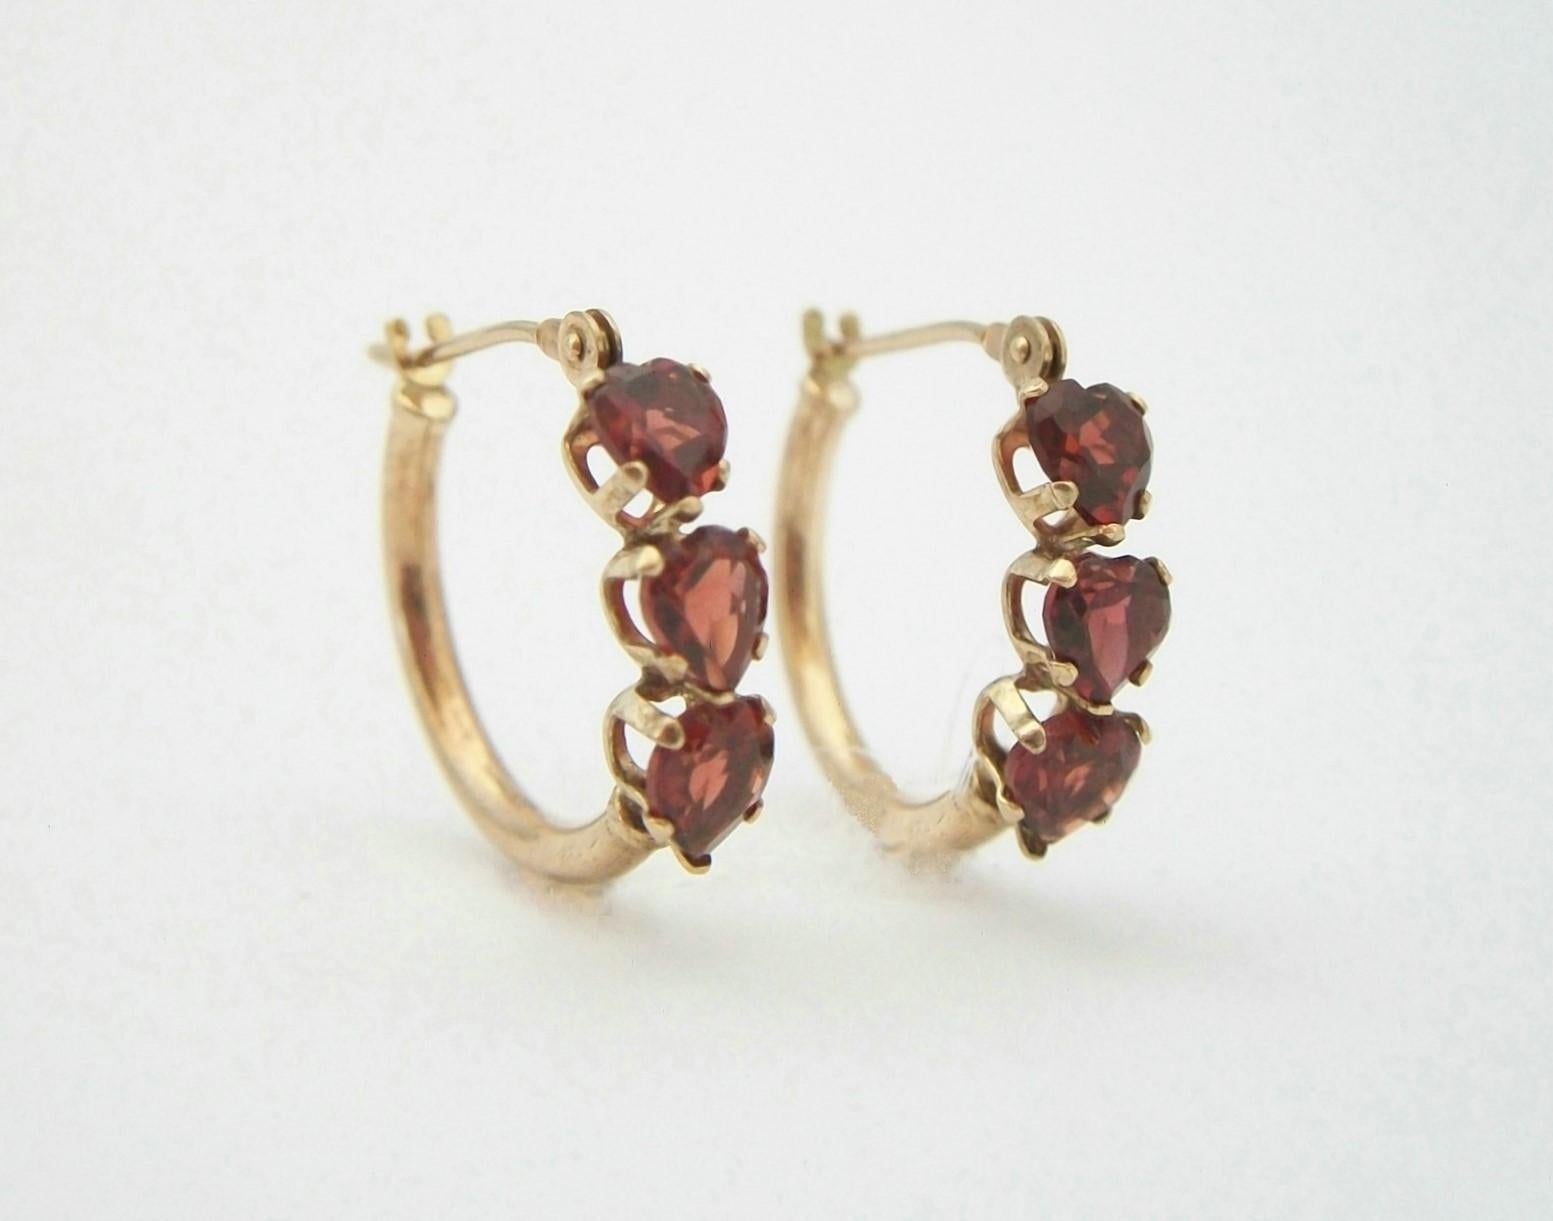 Vintage pair of heart shaped Cubic Zirconia garnet and 10K yellow gold hoop earrings - featuring three prong set CZ garnets to each hoop - signed on each hoop wire (unidentified maker - see last photo) - United States - circa 1980's.

Excellent